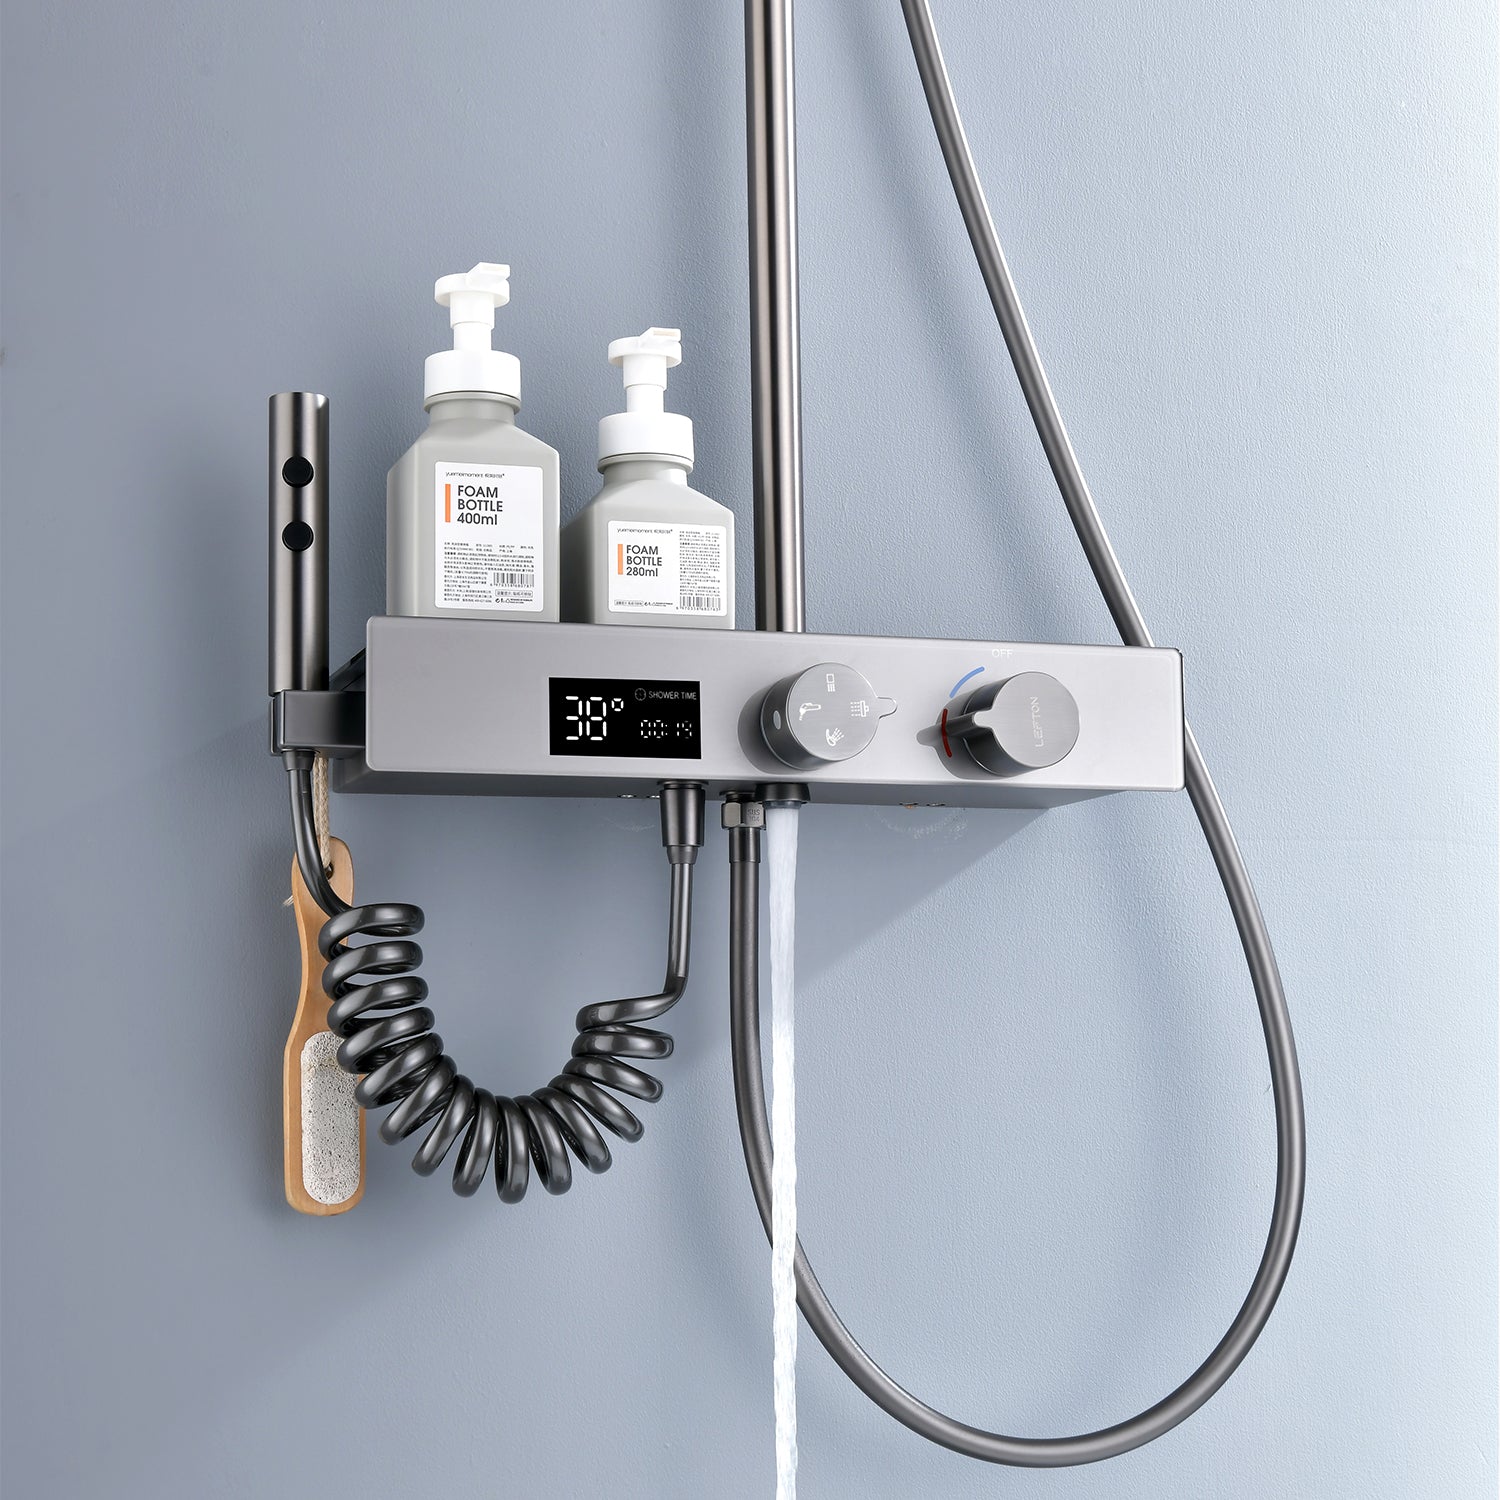 Lefton Thermostatic Shower System with Temperature Display and 4 Water Outlet Modes-SST2205